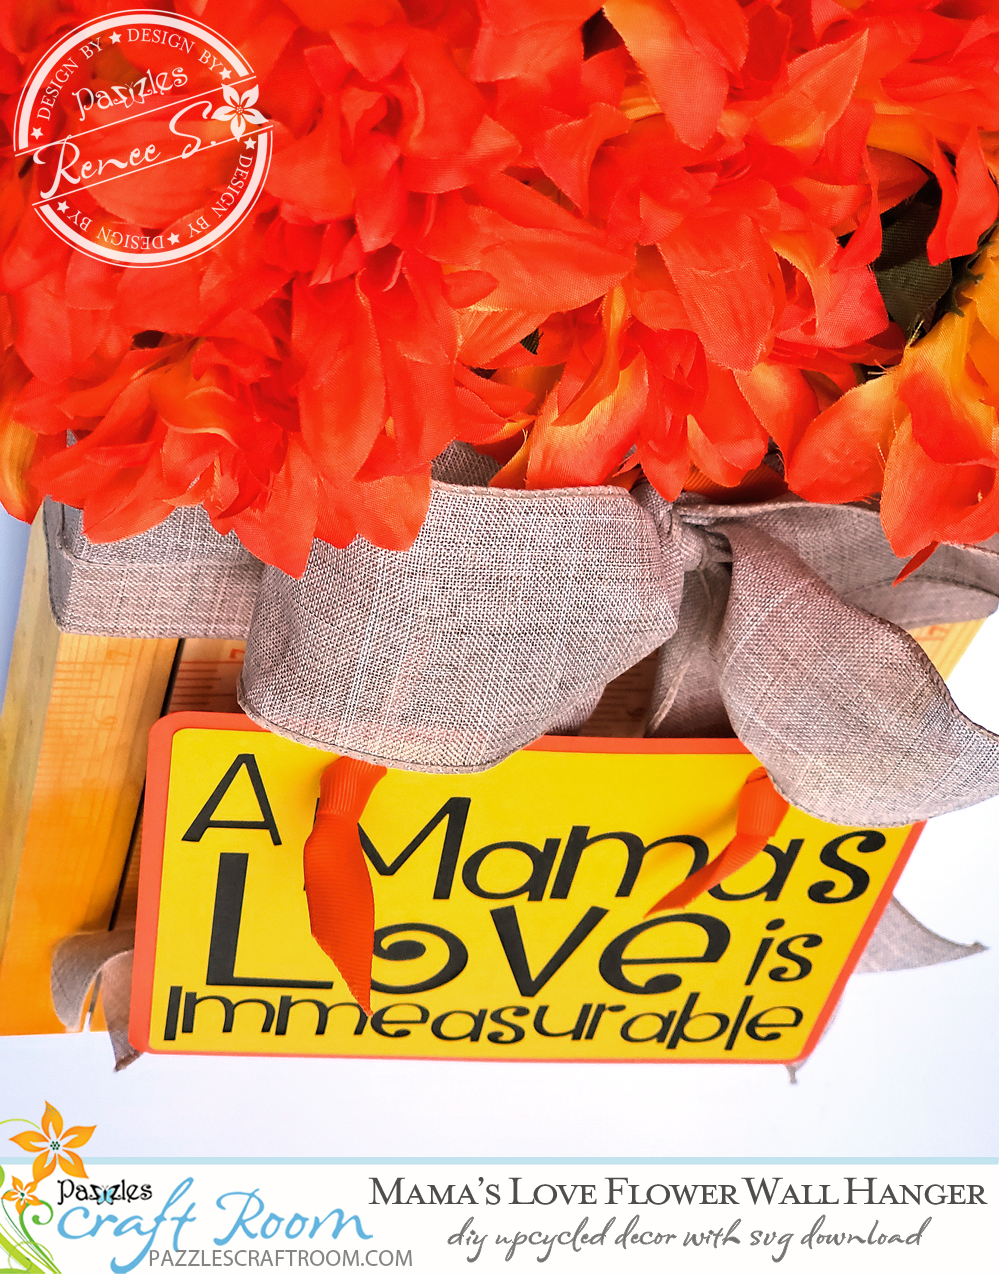 Pazzles DIY Mama's Love Flower Wall Hanger with instant SVG download. Instant SVG download compatible with all major electronic cutters including Pazzles Inspiration, Cricut, and Silhouette Cameo. Design by Renee Smart.